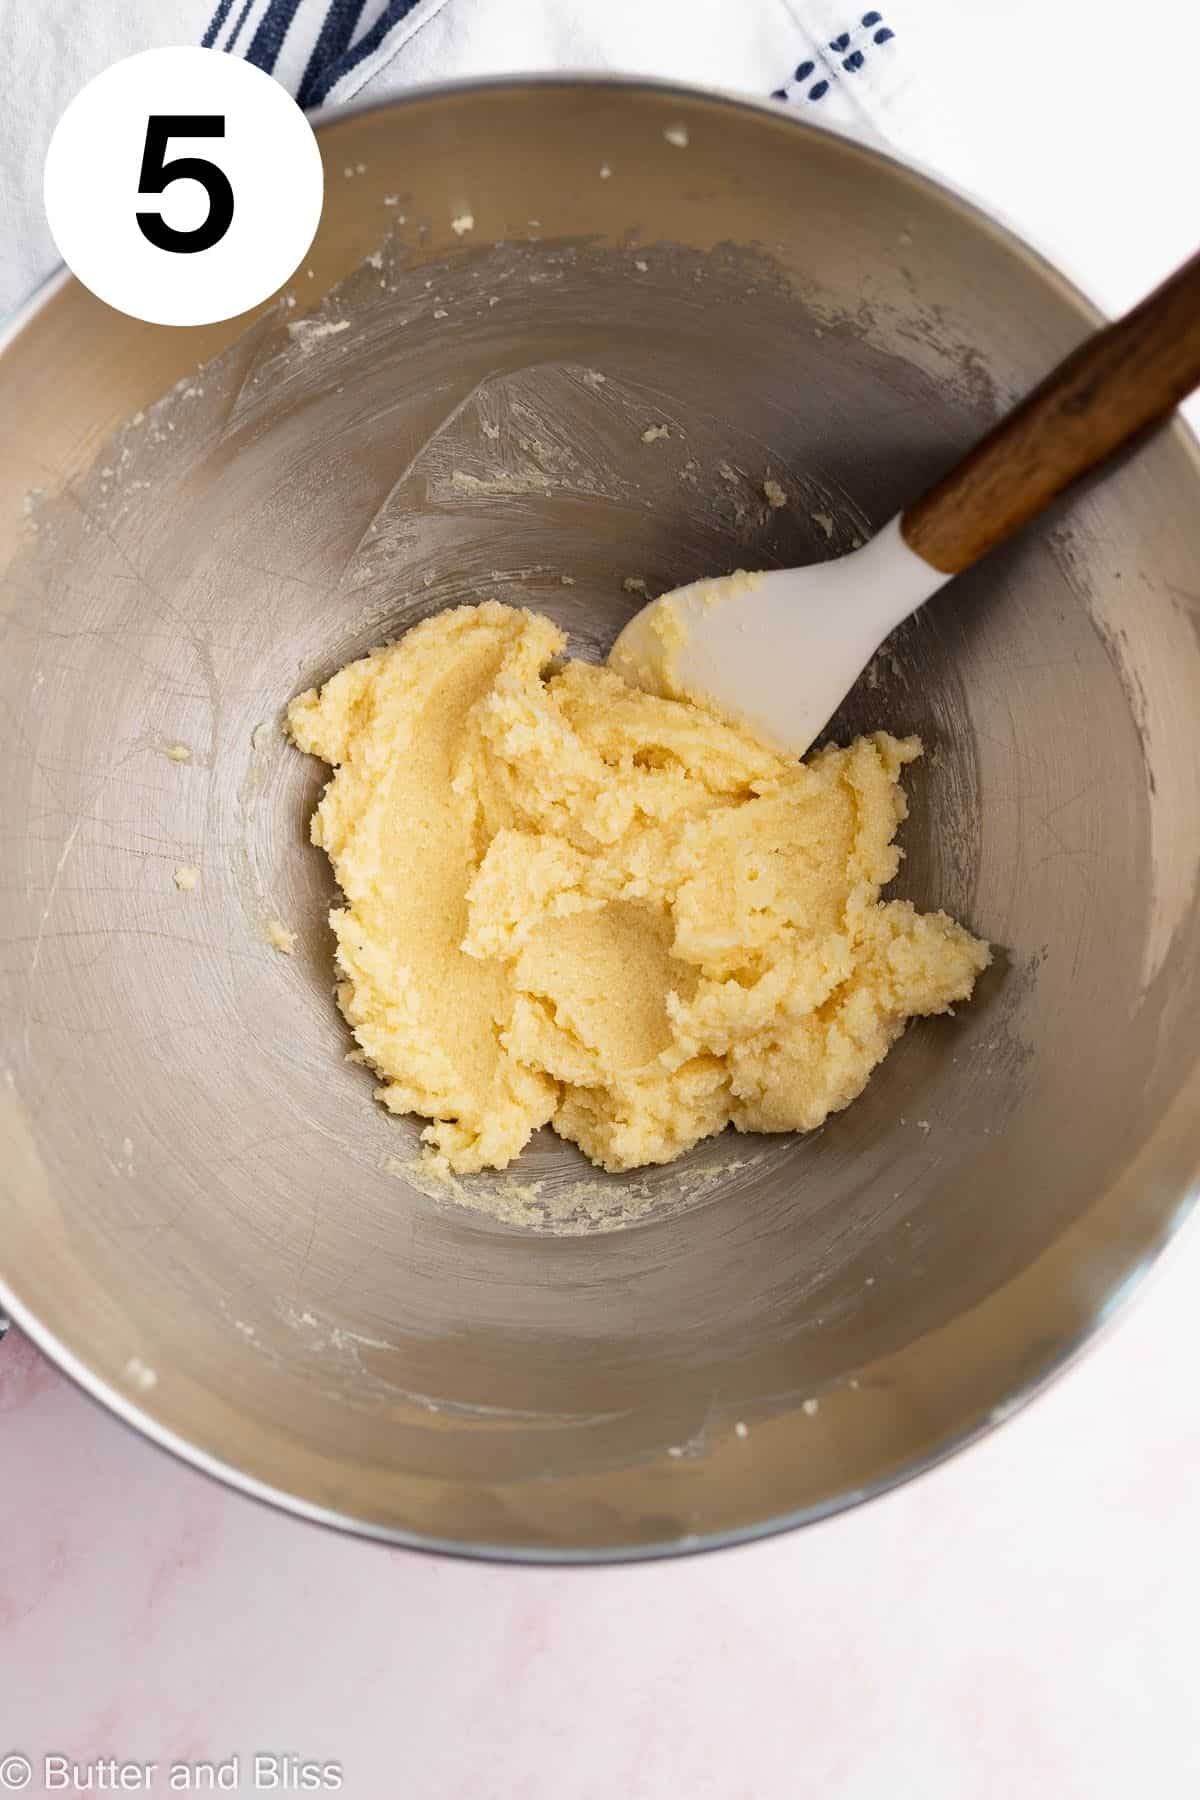 Butter and sugar that have been creamed in a mixing bowl.